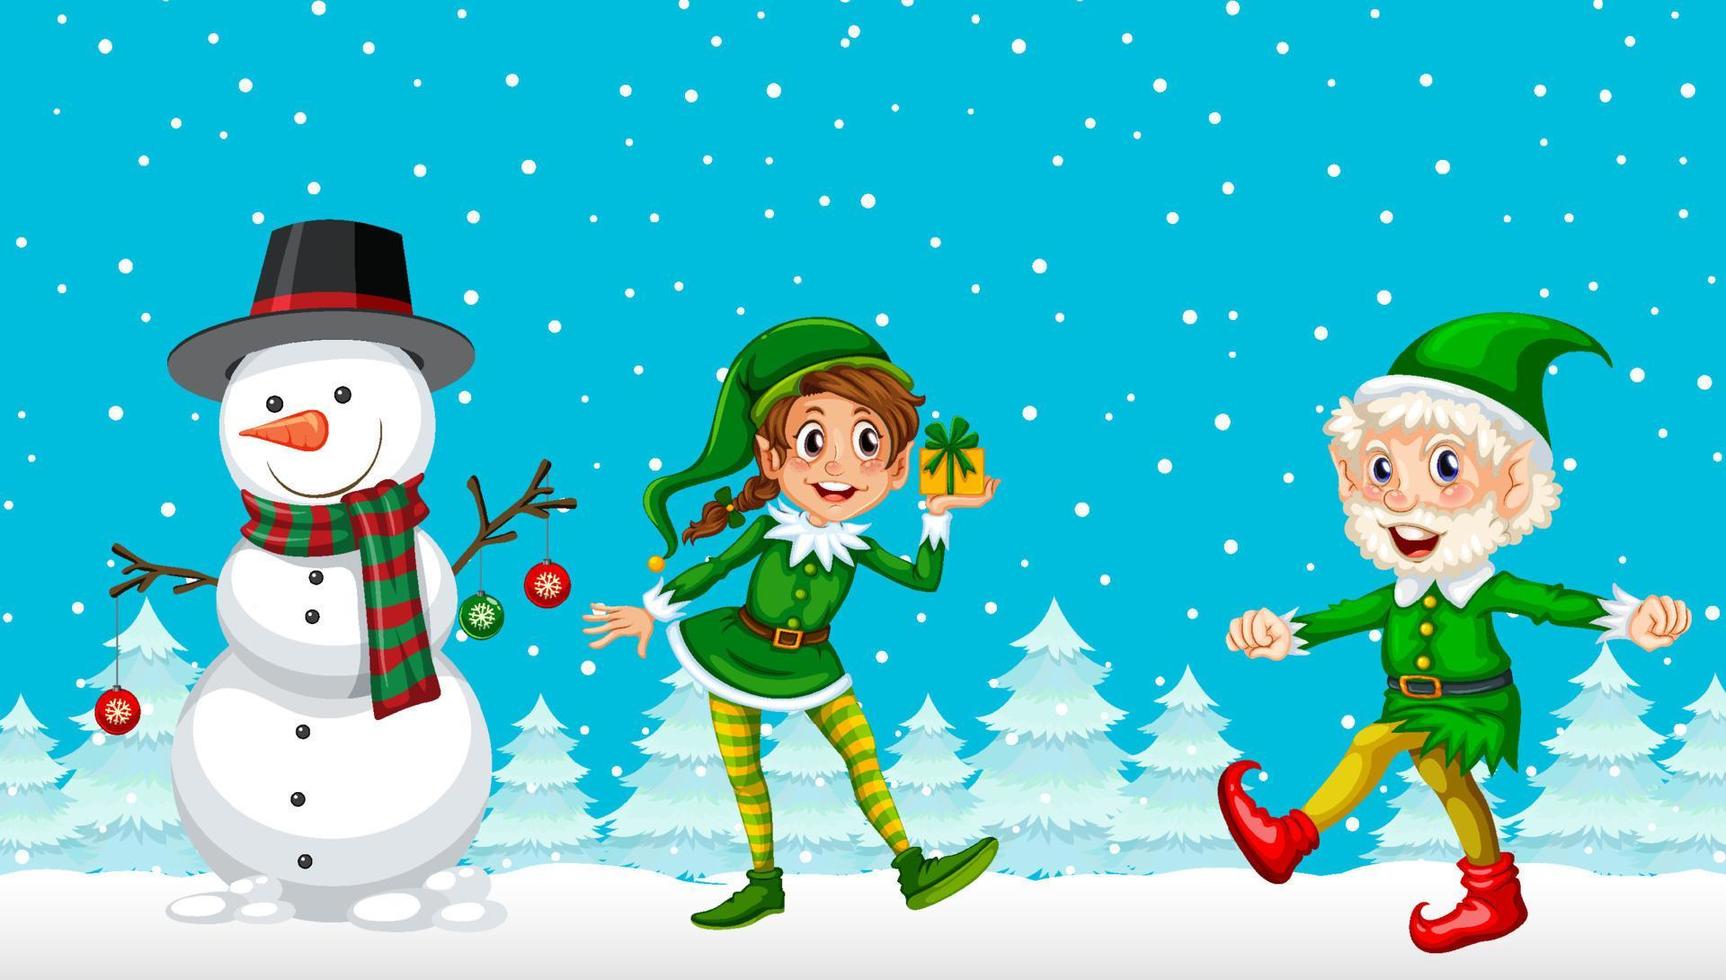 Christmas cartoon characters on snowy blue background vector